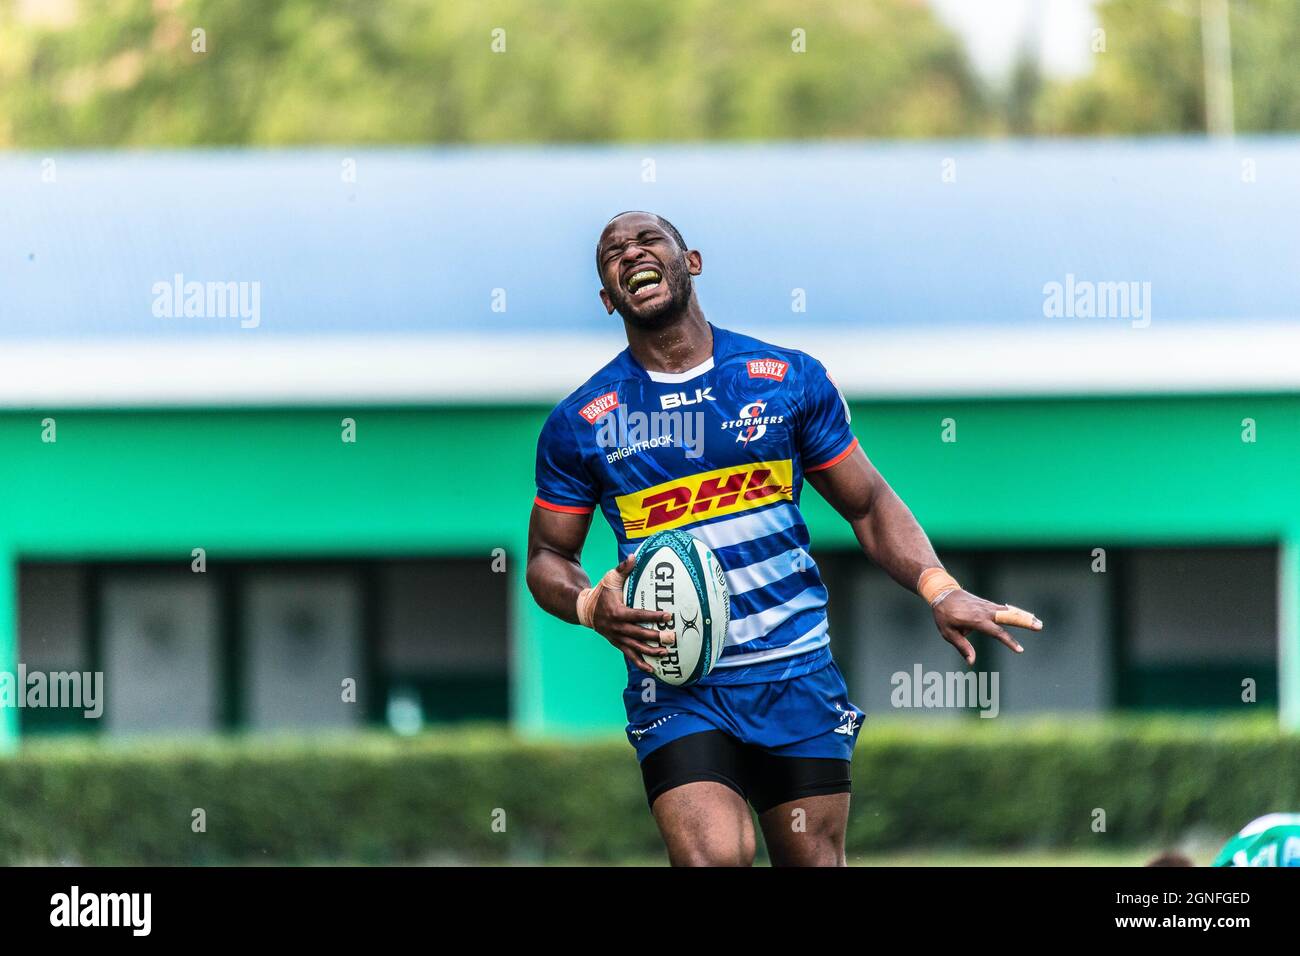 Monigo stadium, Treviso, Italy, September 25, 2021, Sergeal Petersen (DHL Stormers) during Benetton Rugby vs DHL Stormers - United Rugby Championship match Stock Photo